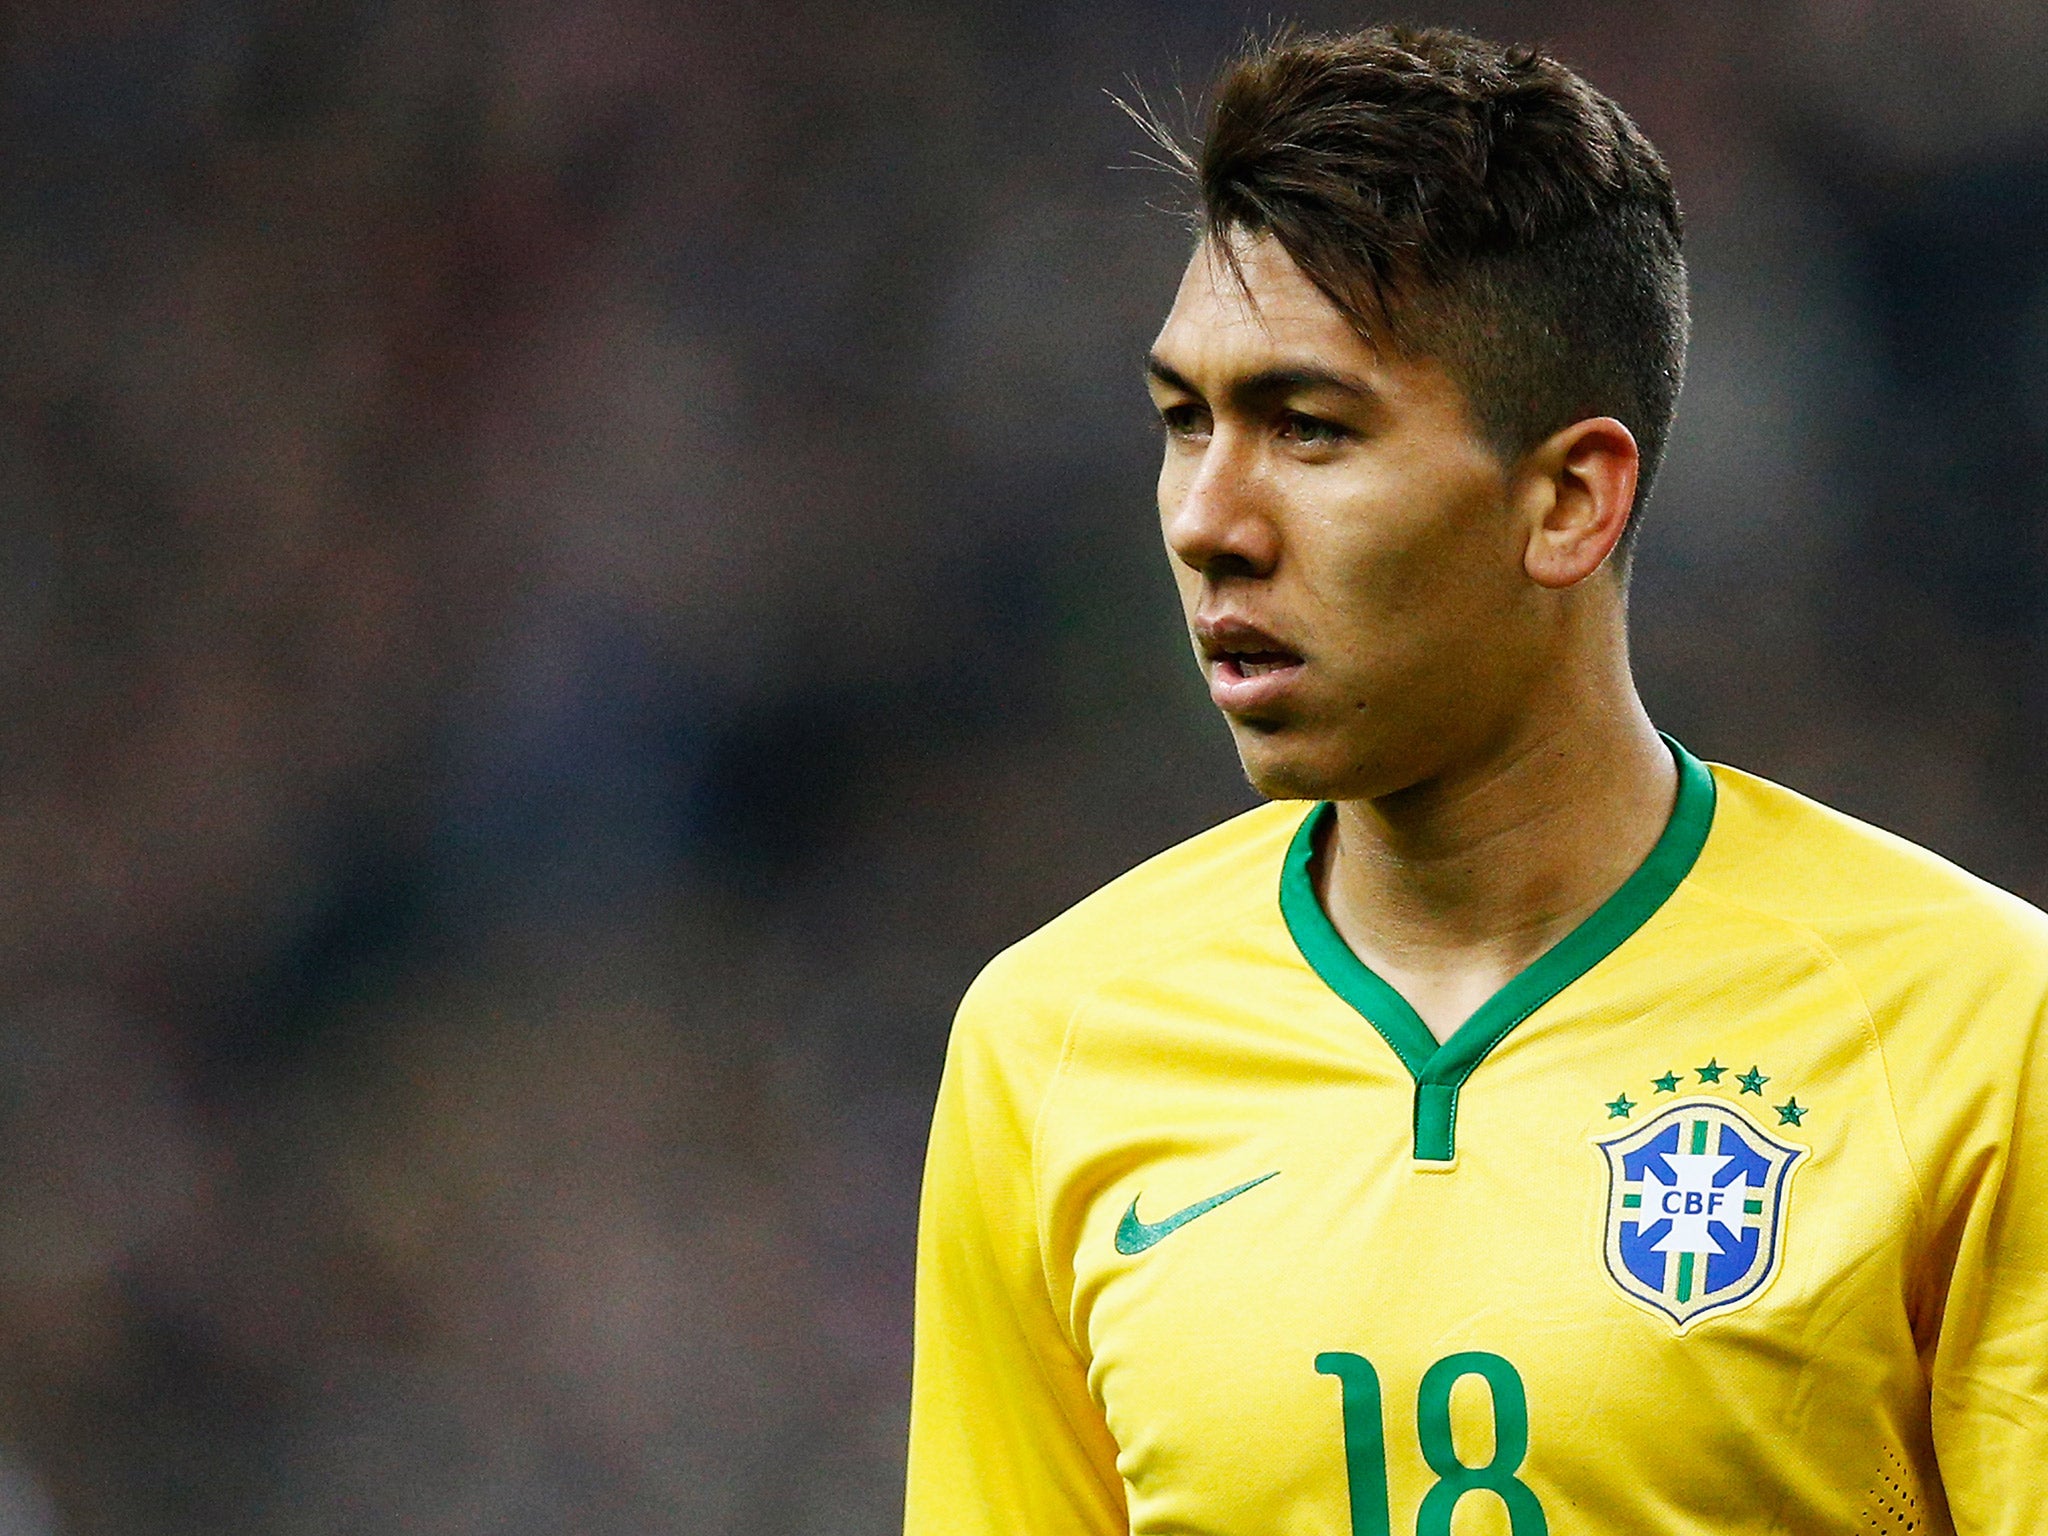 Firmino is currently representing Brazil at the Copa America in Chile